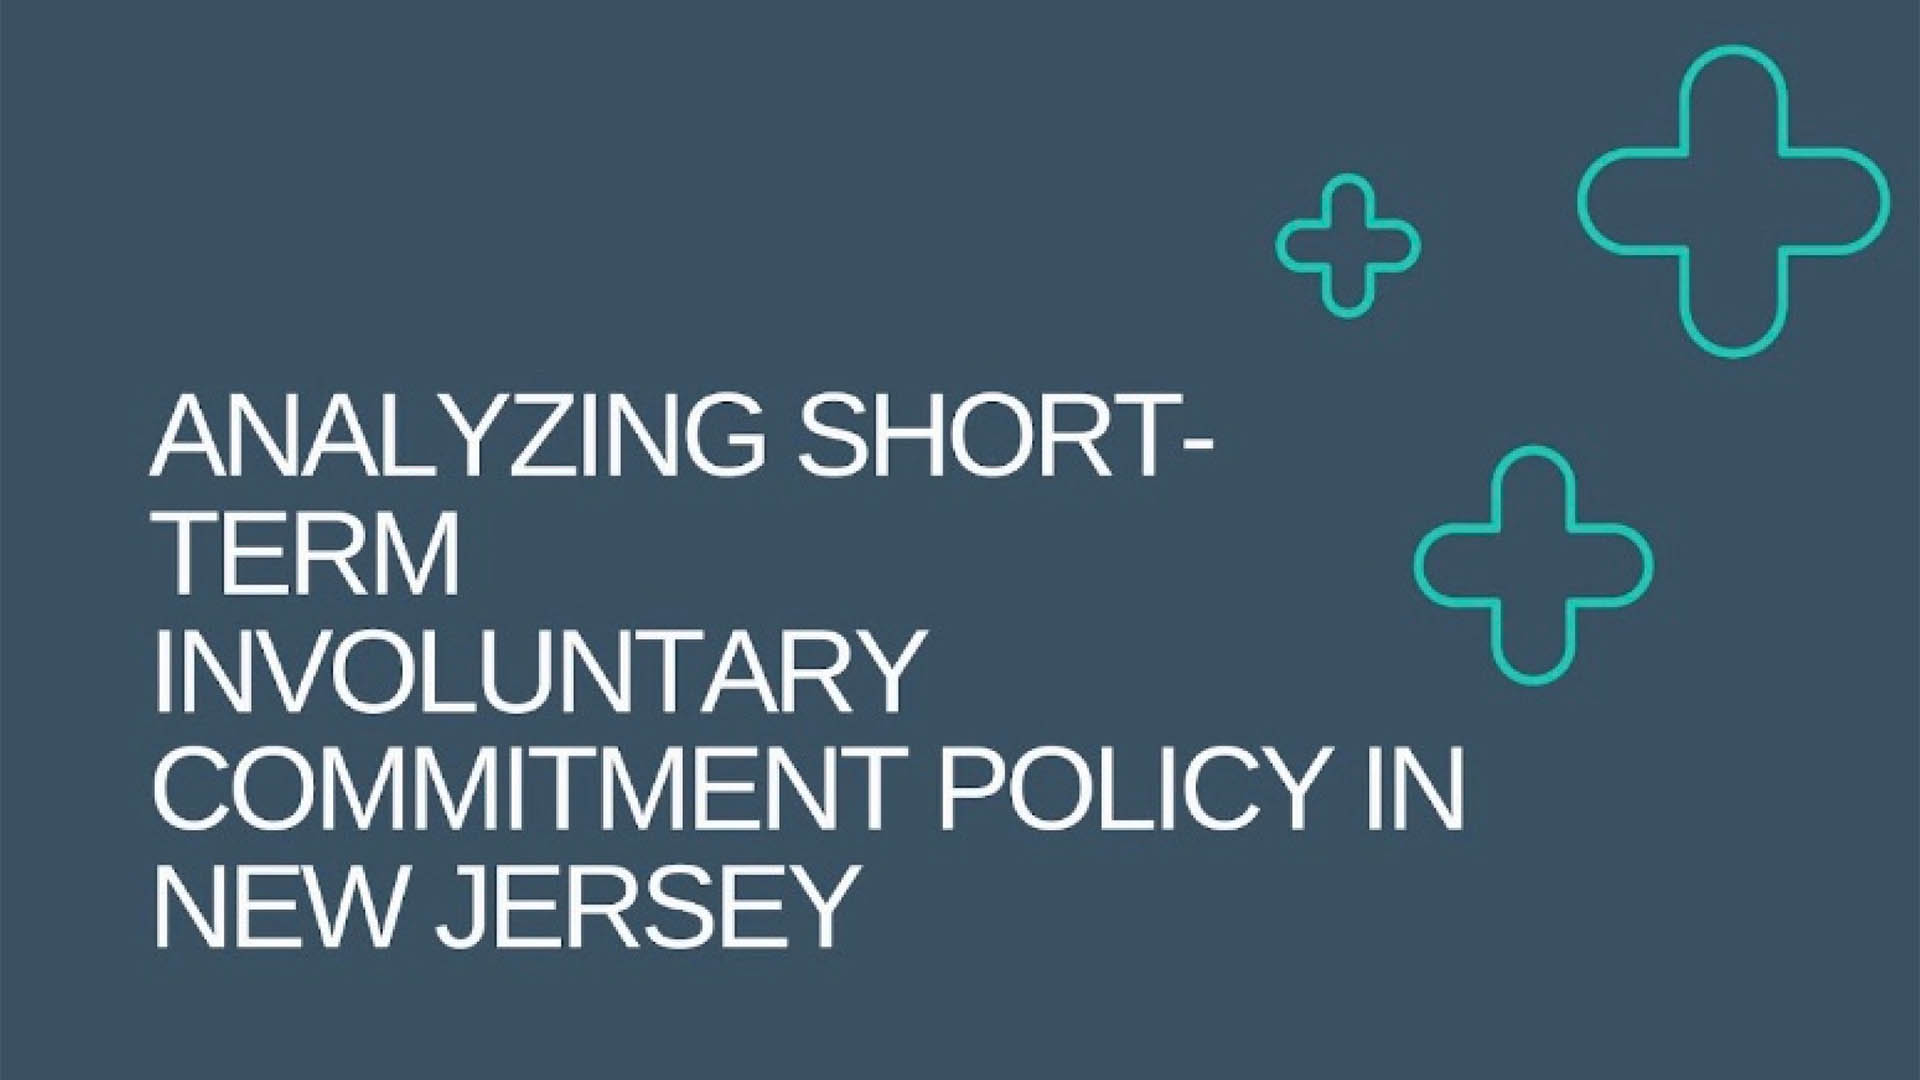 Analyzing Short-Term Involuntary Commitment Policy in New Jersey